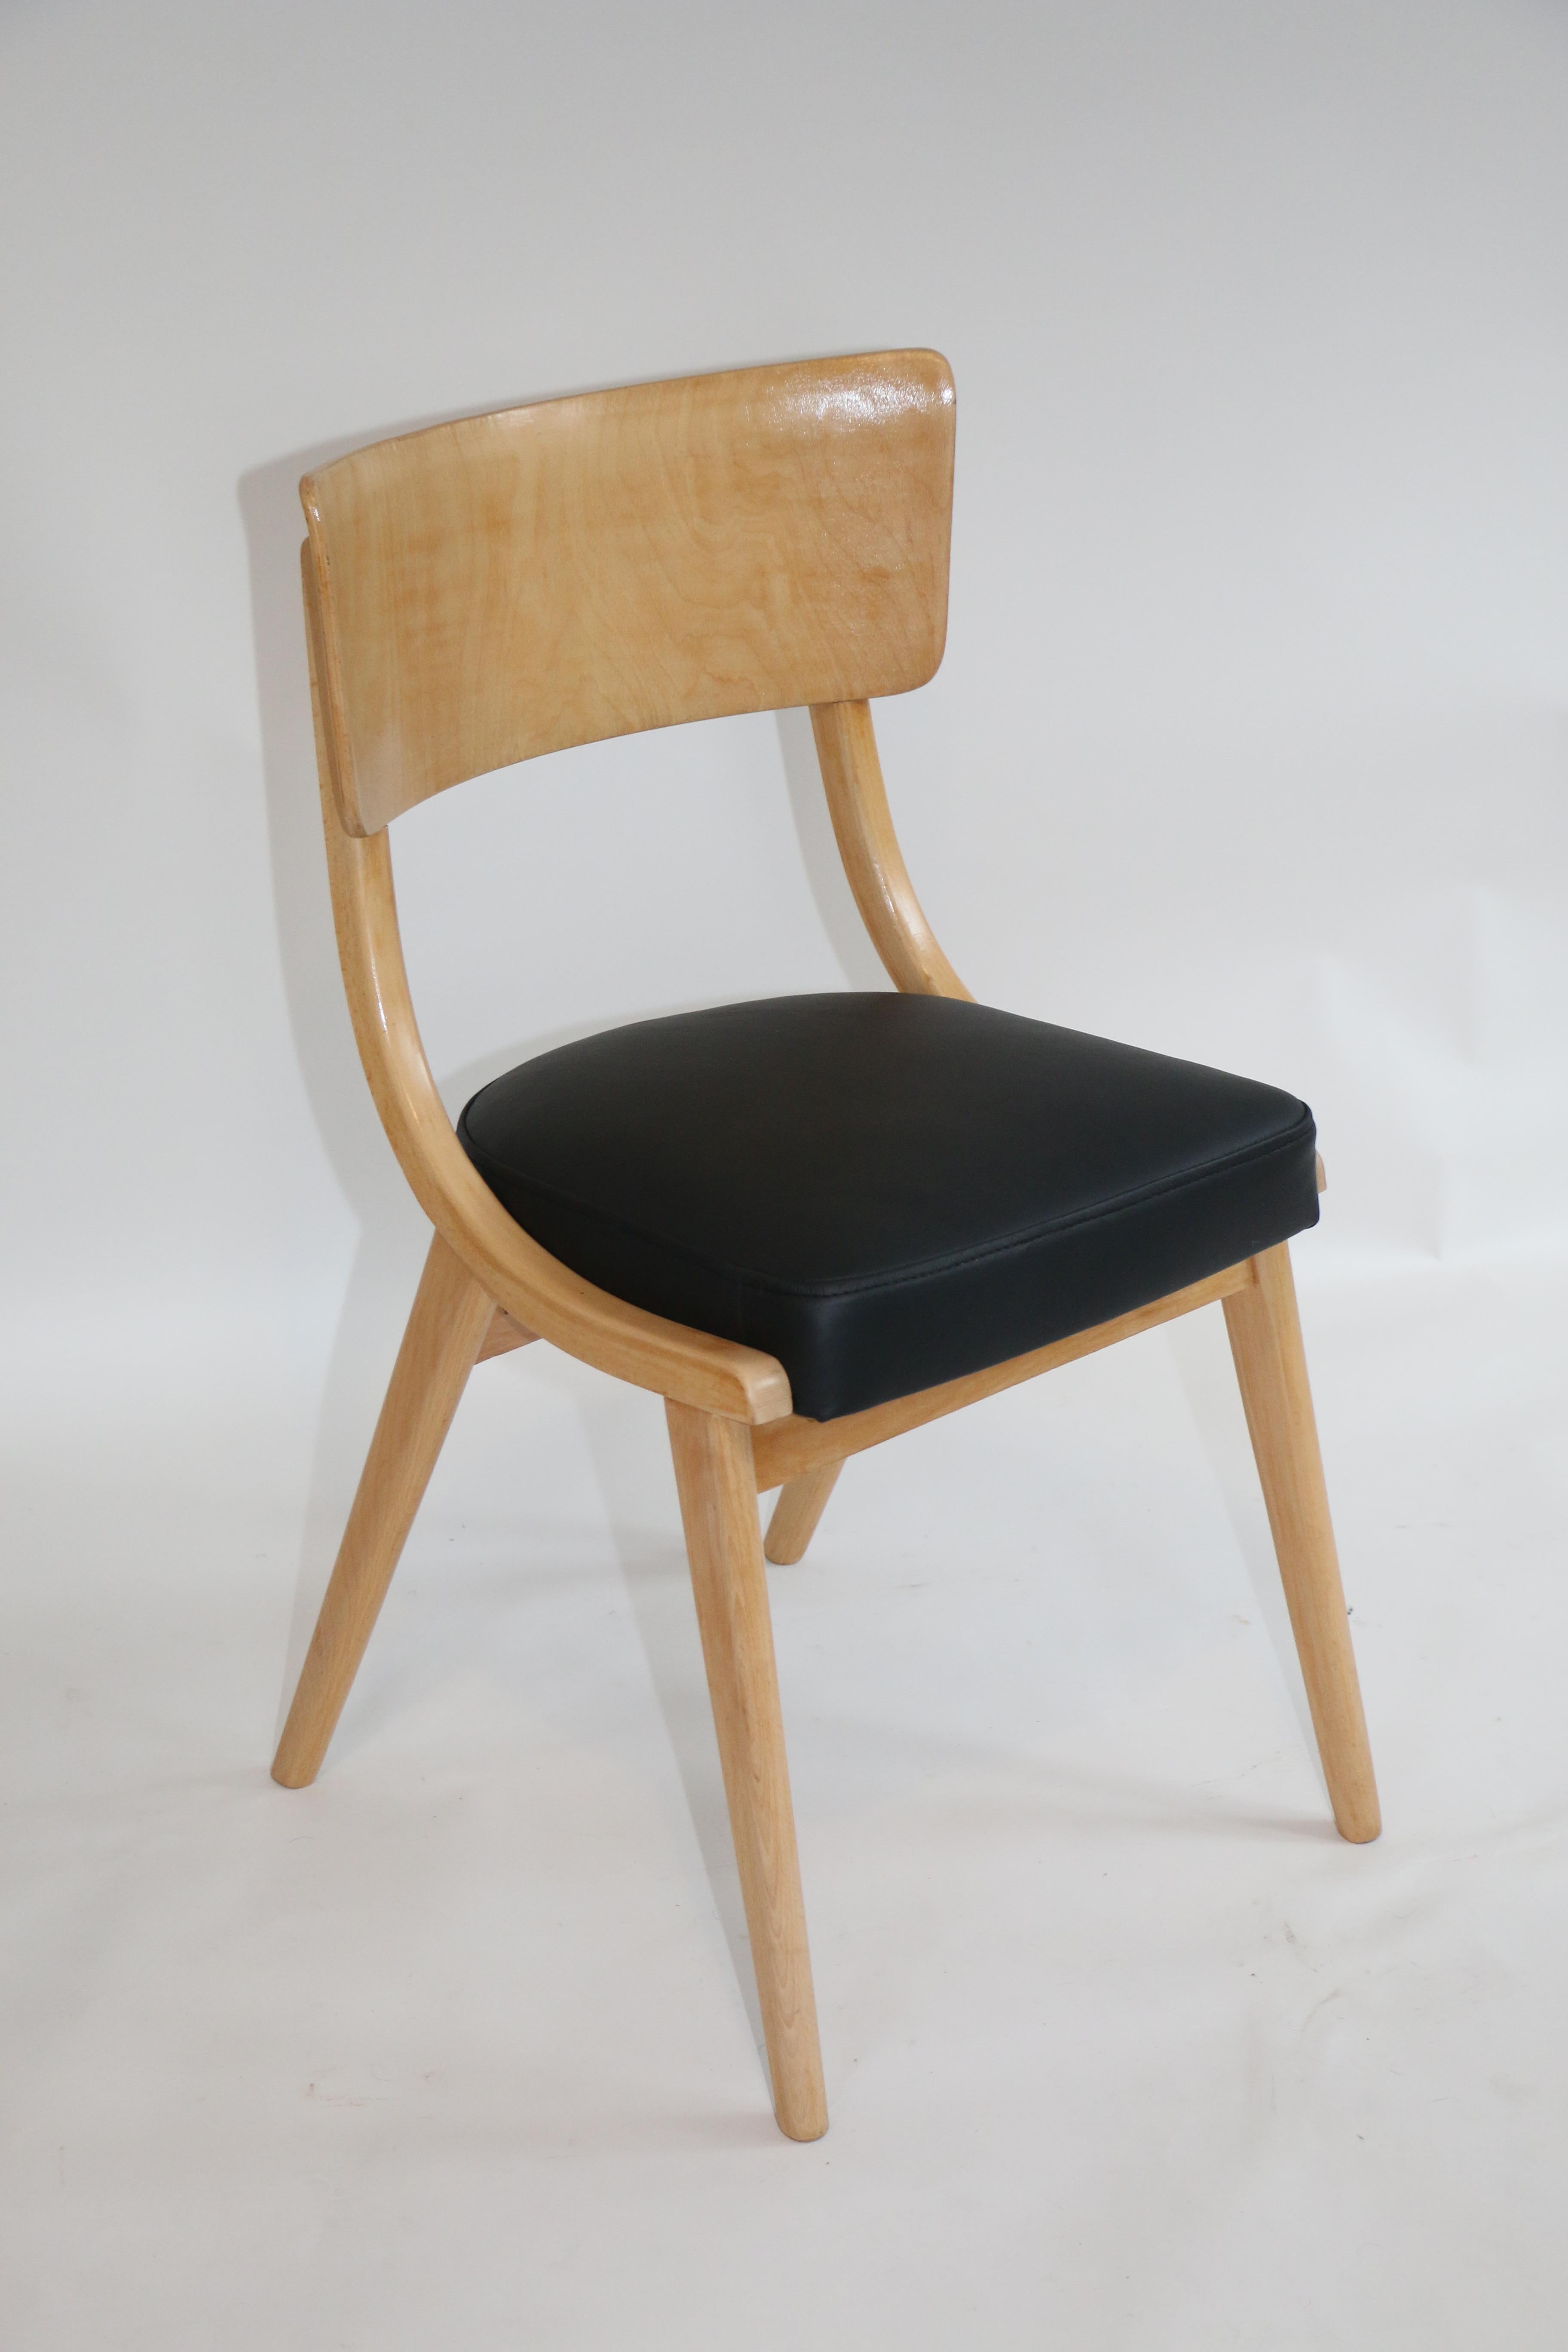 20th Century Black Natural Leather Chairs from 1980s like Jumper For Sale